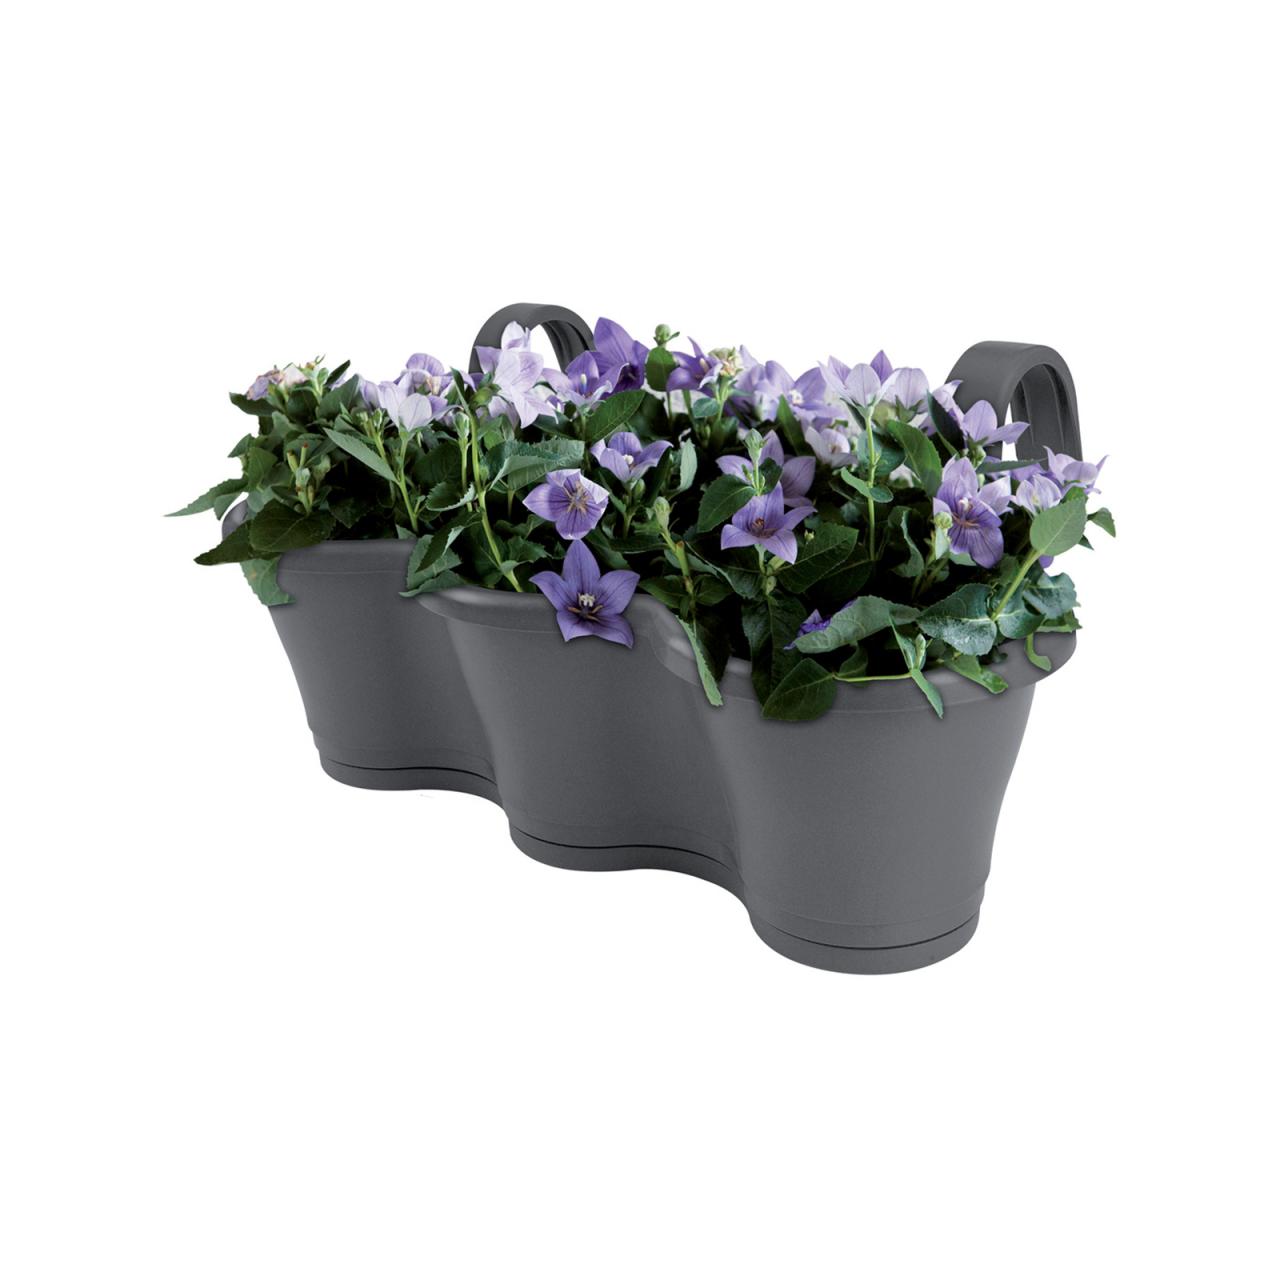 Hanging Plants Indoor | Bunnings Balcony Pots: A Comprehensive Guide to Beautify Your Outdoor Oasis